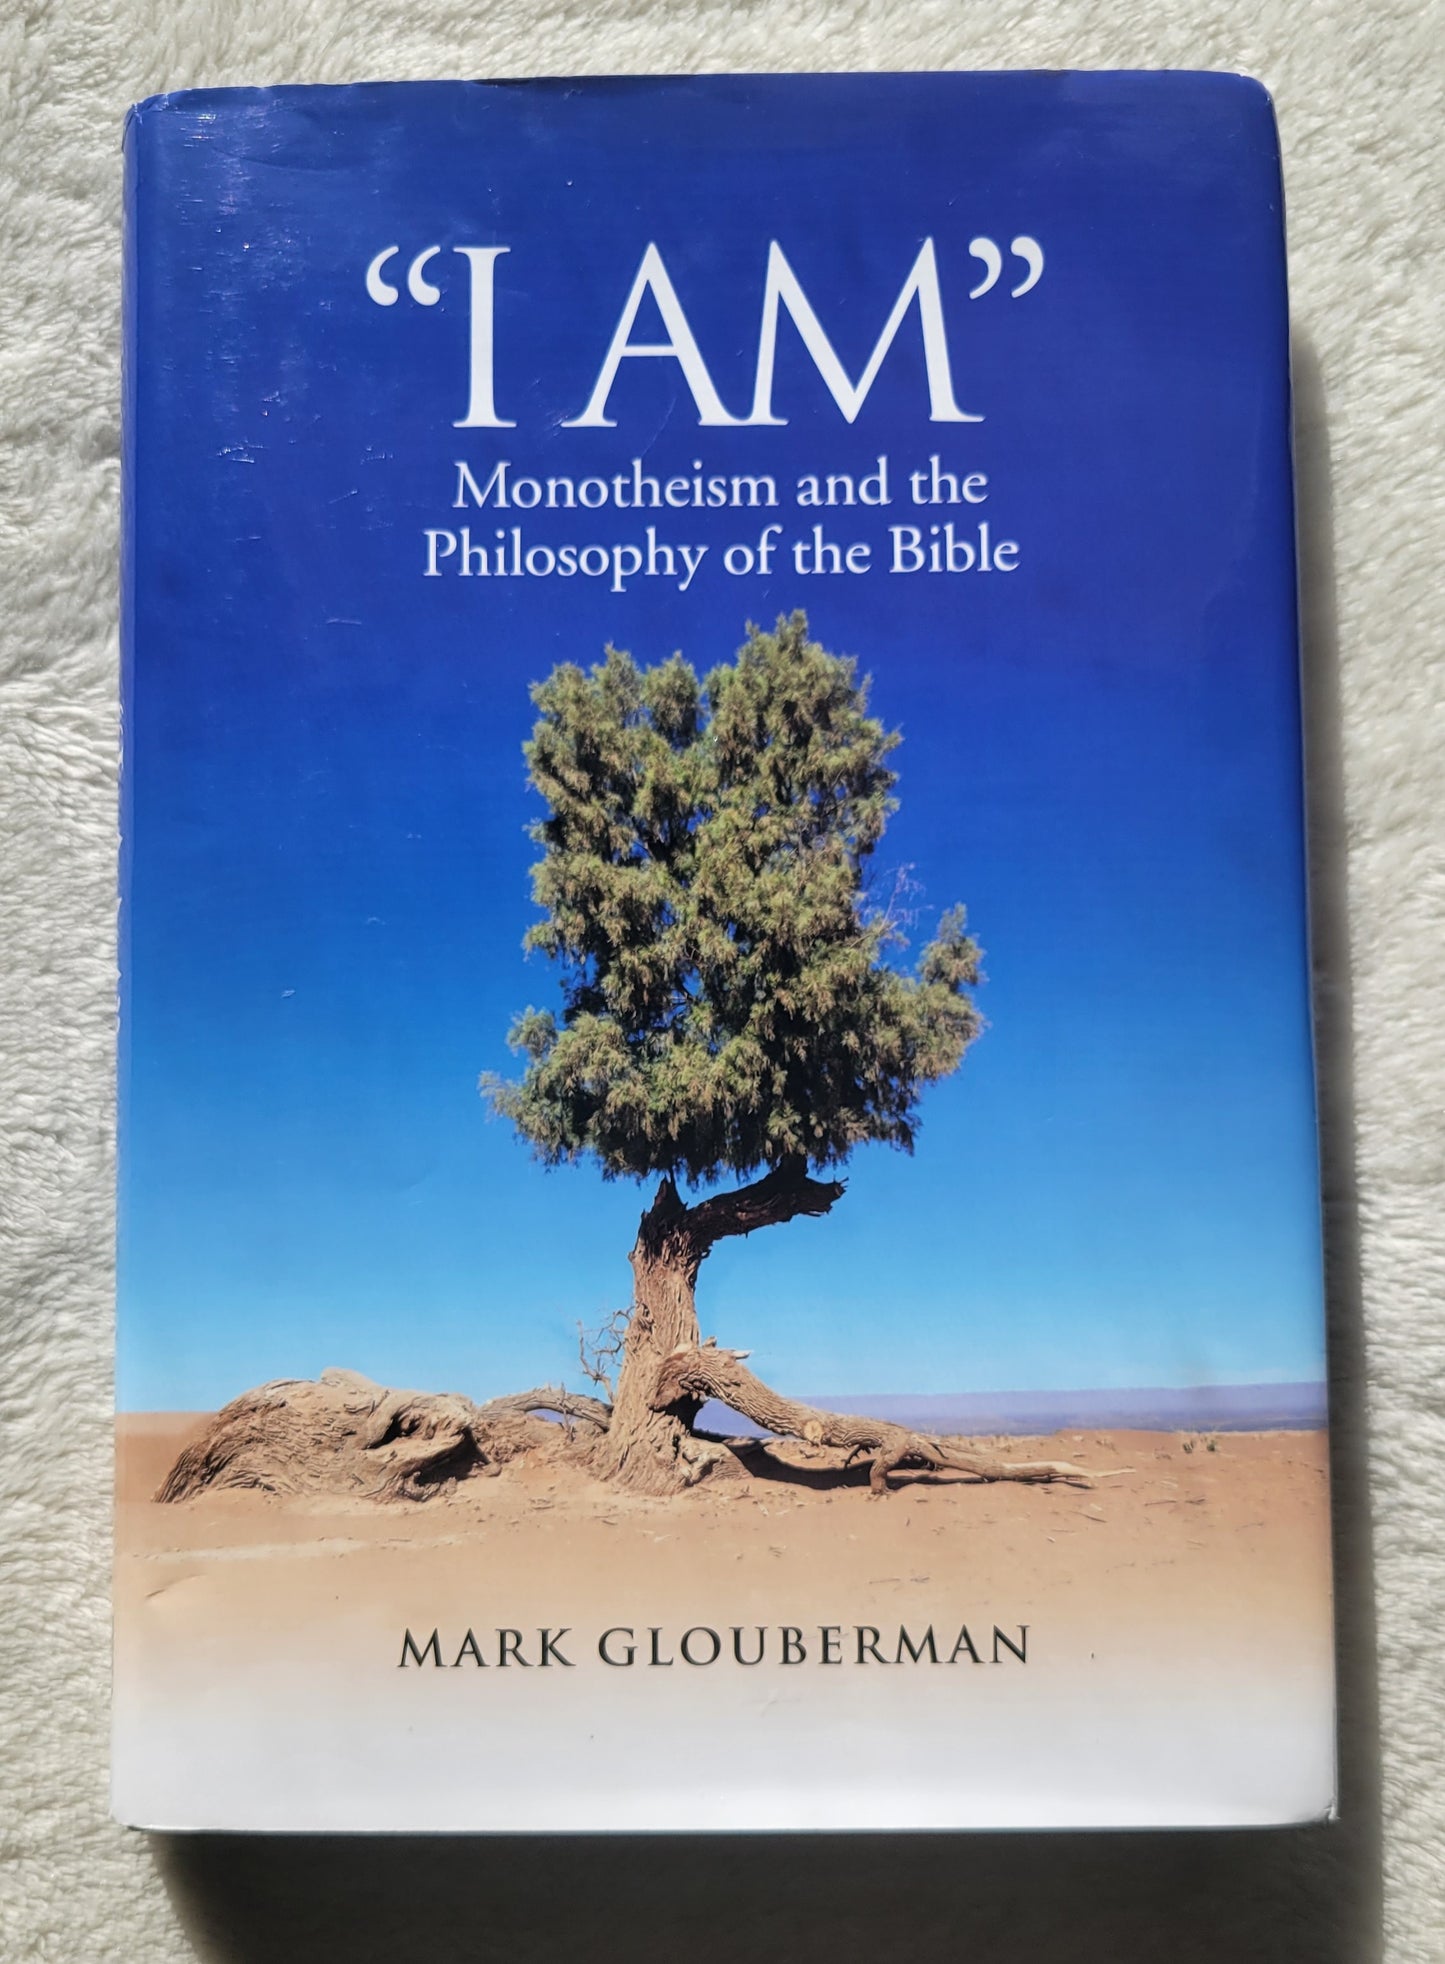 Used book for sale "I Am: Monotheism and the Philosophy of the Bible" by Mark Glouberman, University of Toronto Press, 2019. View of front cover.